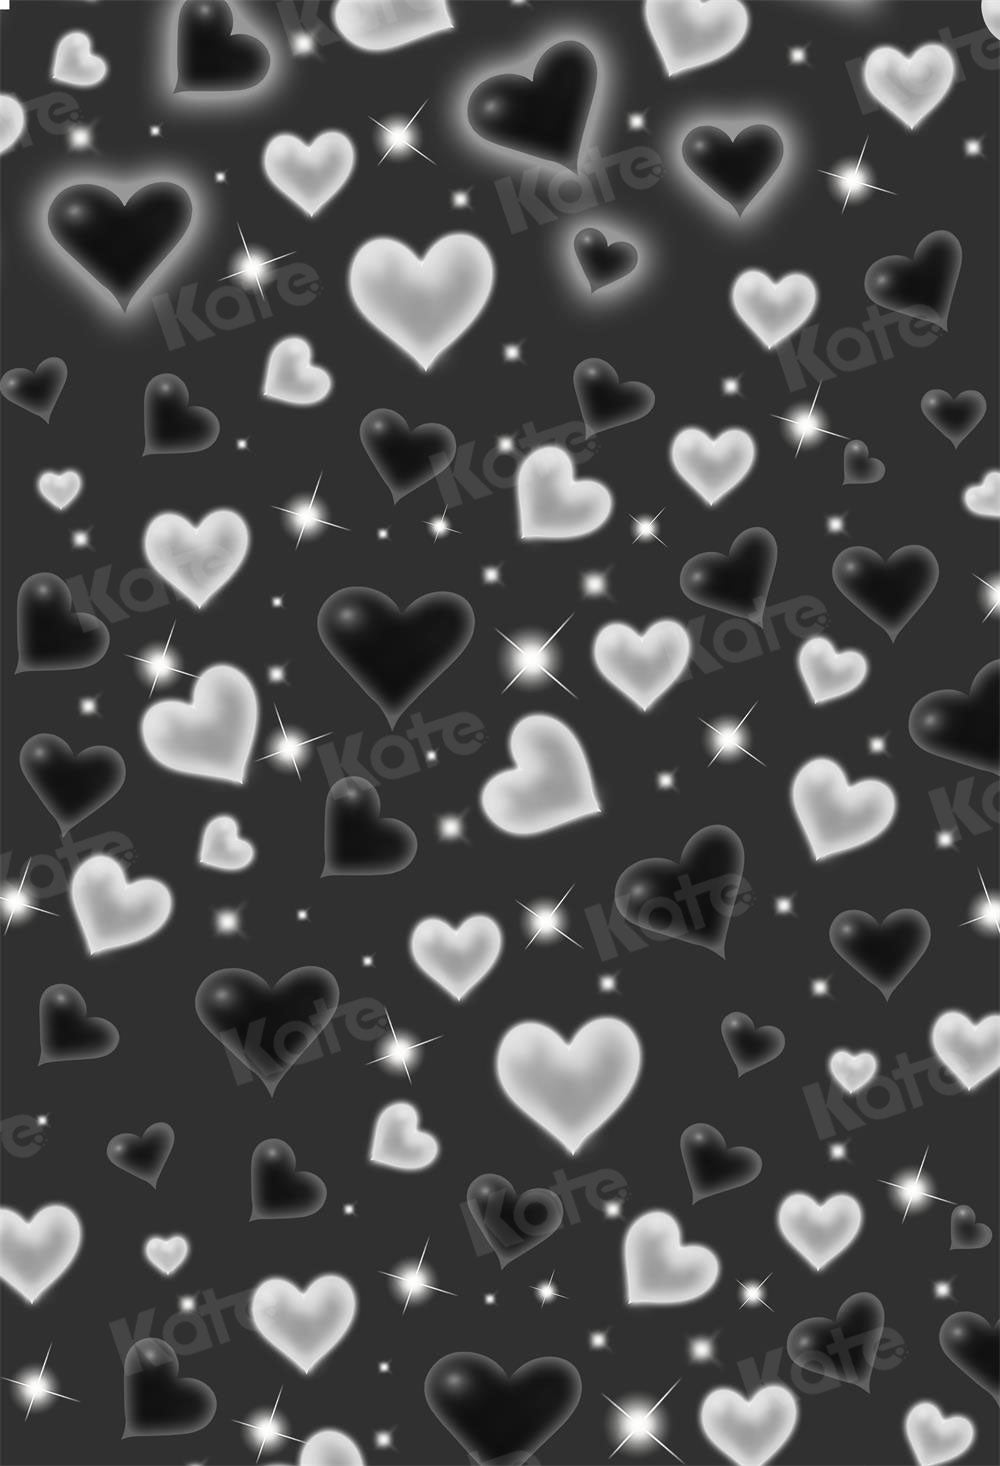 Kate 80 90's Black Valentine Backdrop Sweet Heart for Photography